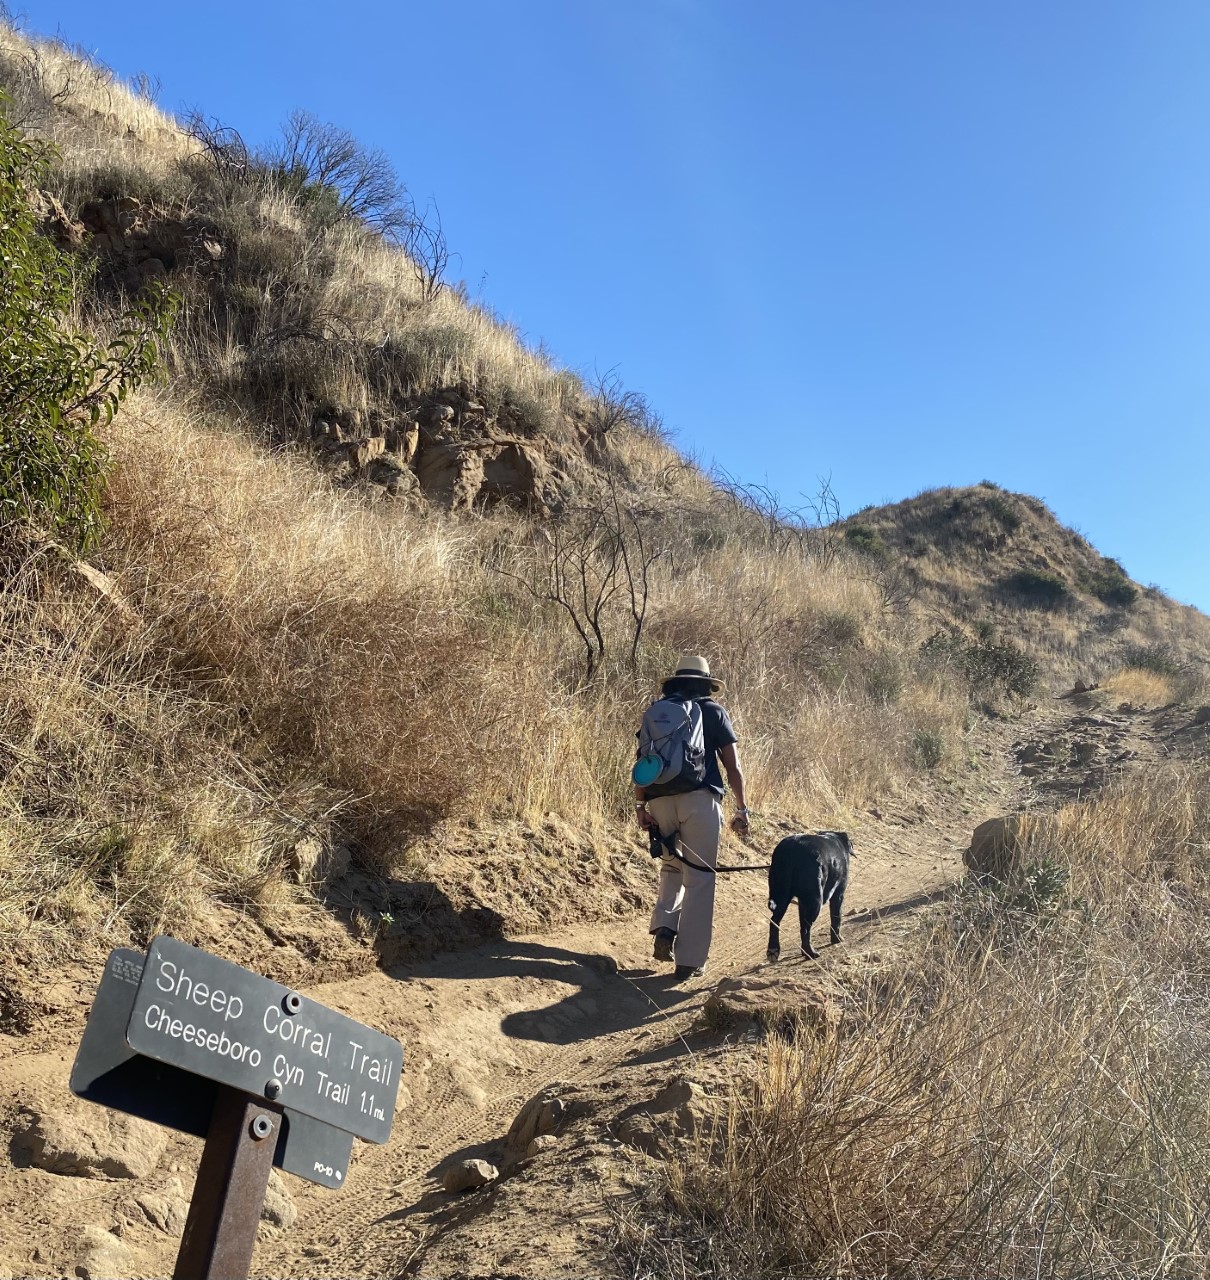 Hiker with a dog on Sheep Corral Trail.